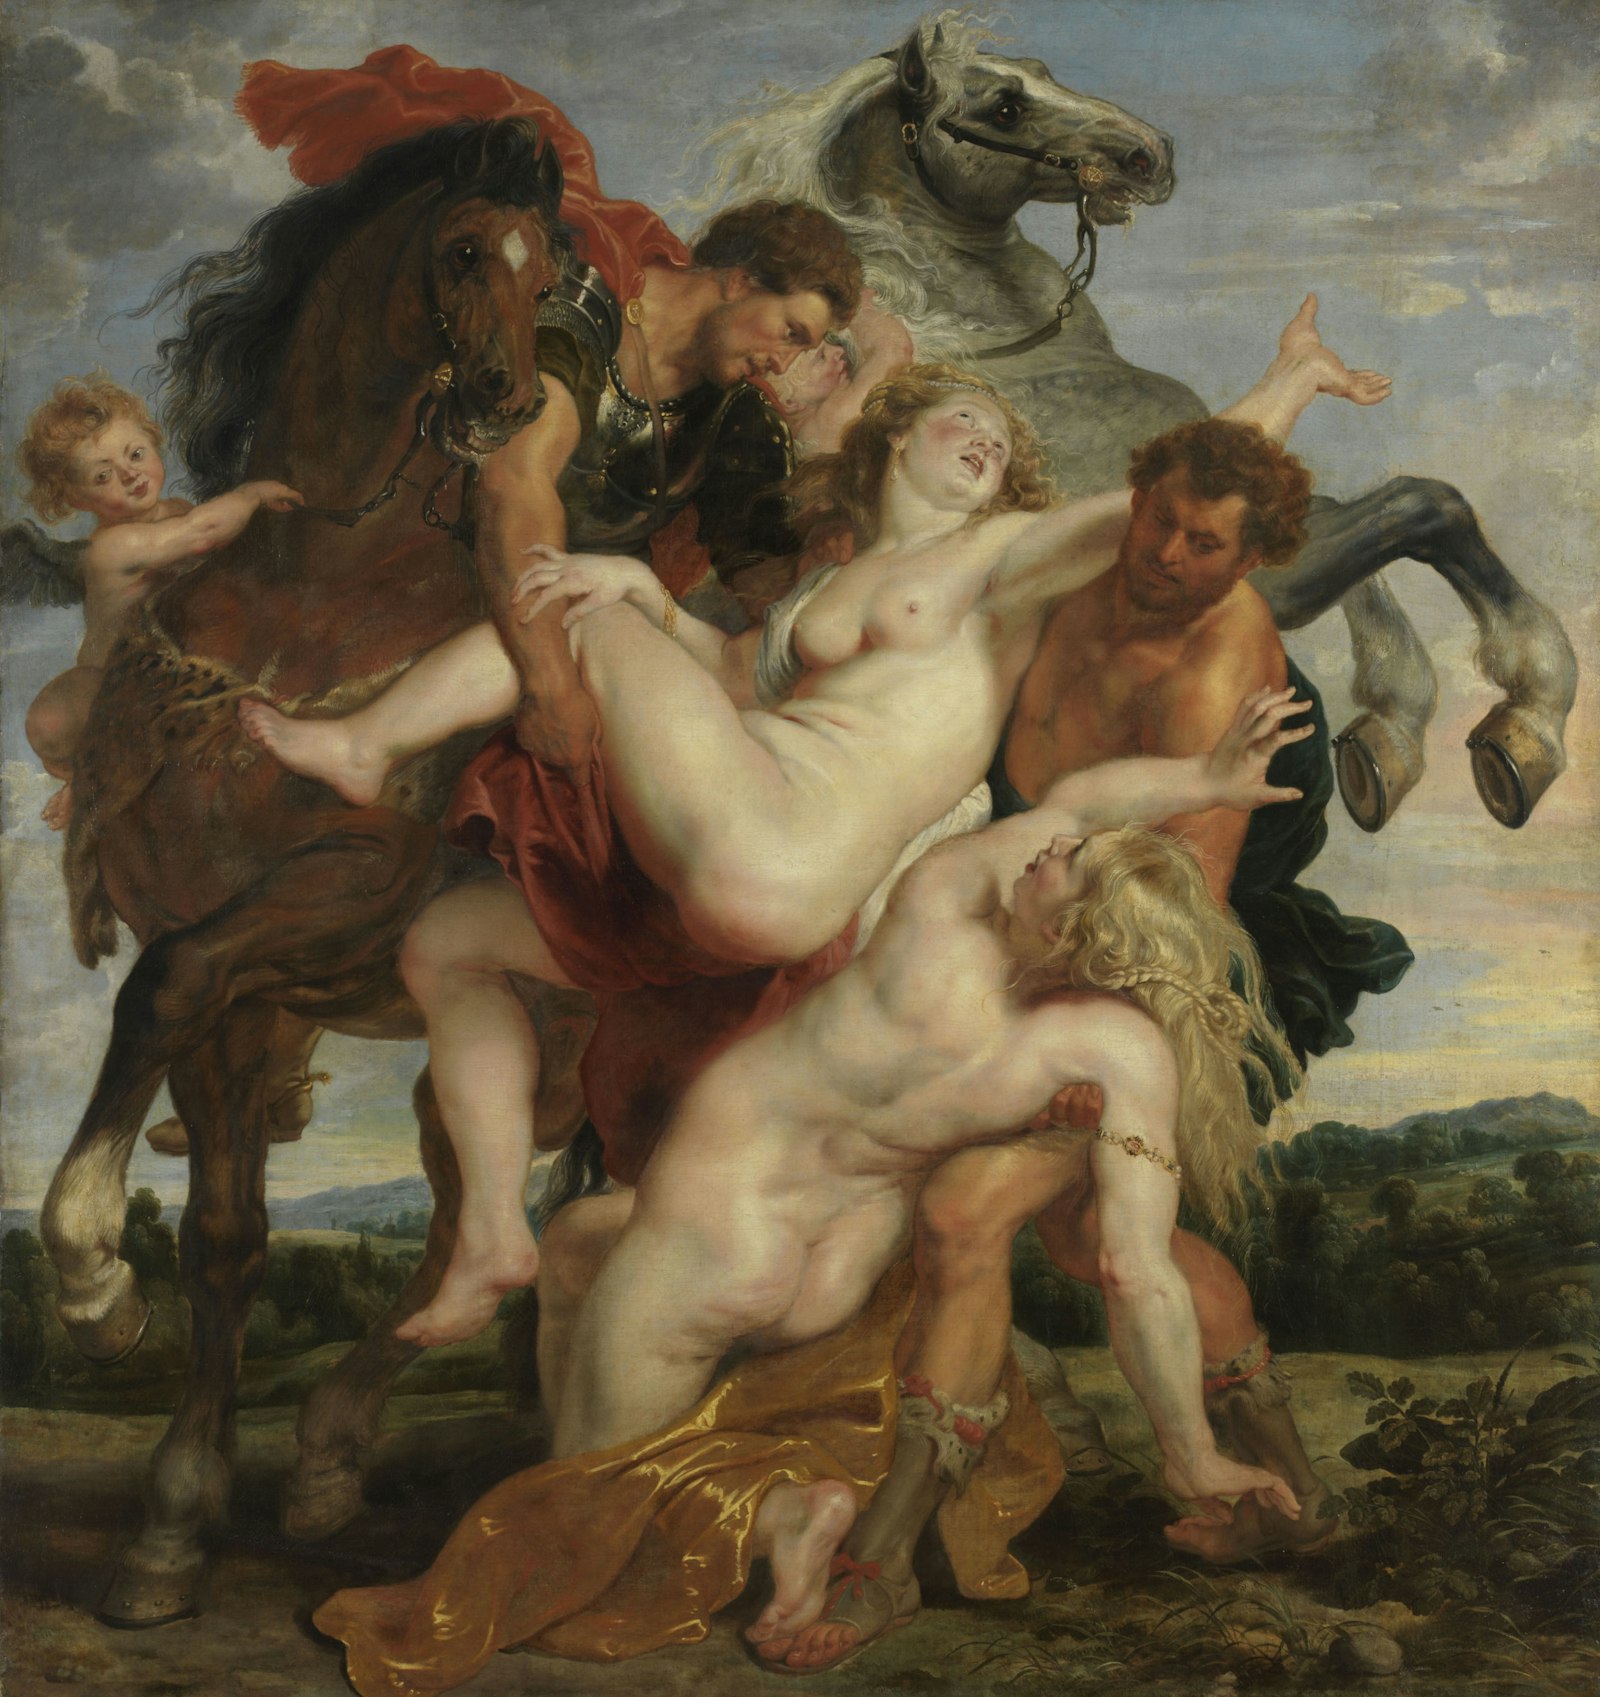 The Rape of the Daughters of Leucippus painting by Peter Paul Rubens, 1618